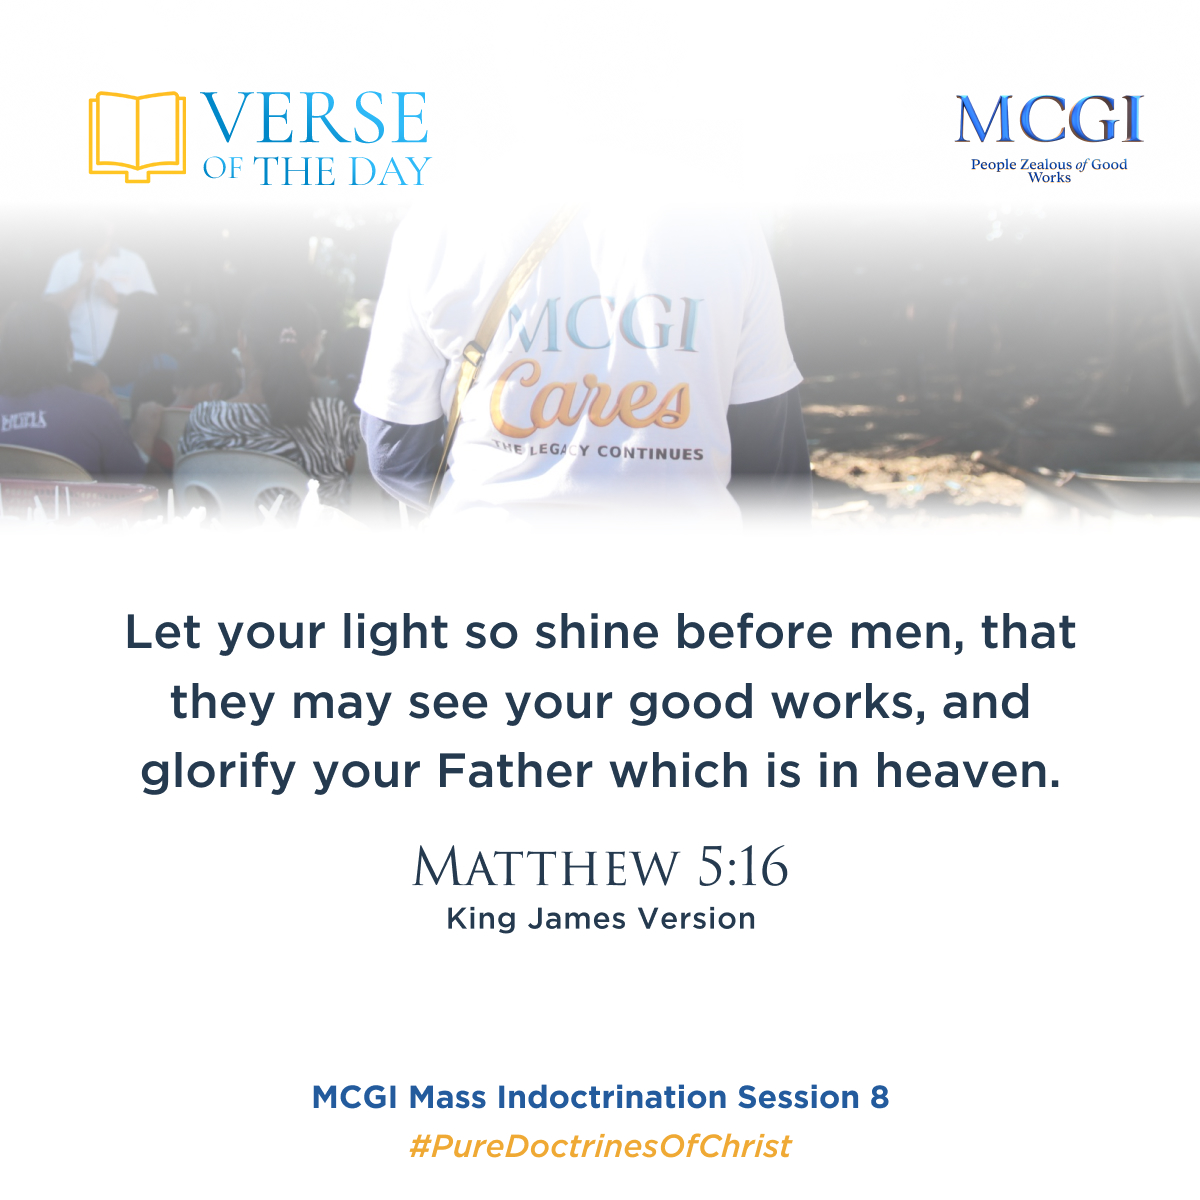 VERSE MCGI OF THE DAY Peoplc Leilu4 Gobu MCGI C Cajves KLGA continues Let your light so shine before men, that they may see your good works, and glorify your Father which is in heaven: MATTHEW 5.16 King James Version MCGI Mass Indoctrination Session 8 #PureDoctrinesOfChrist